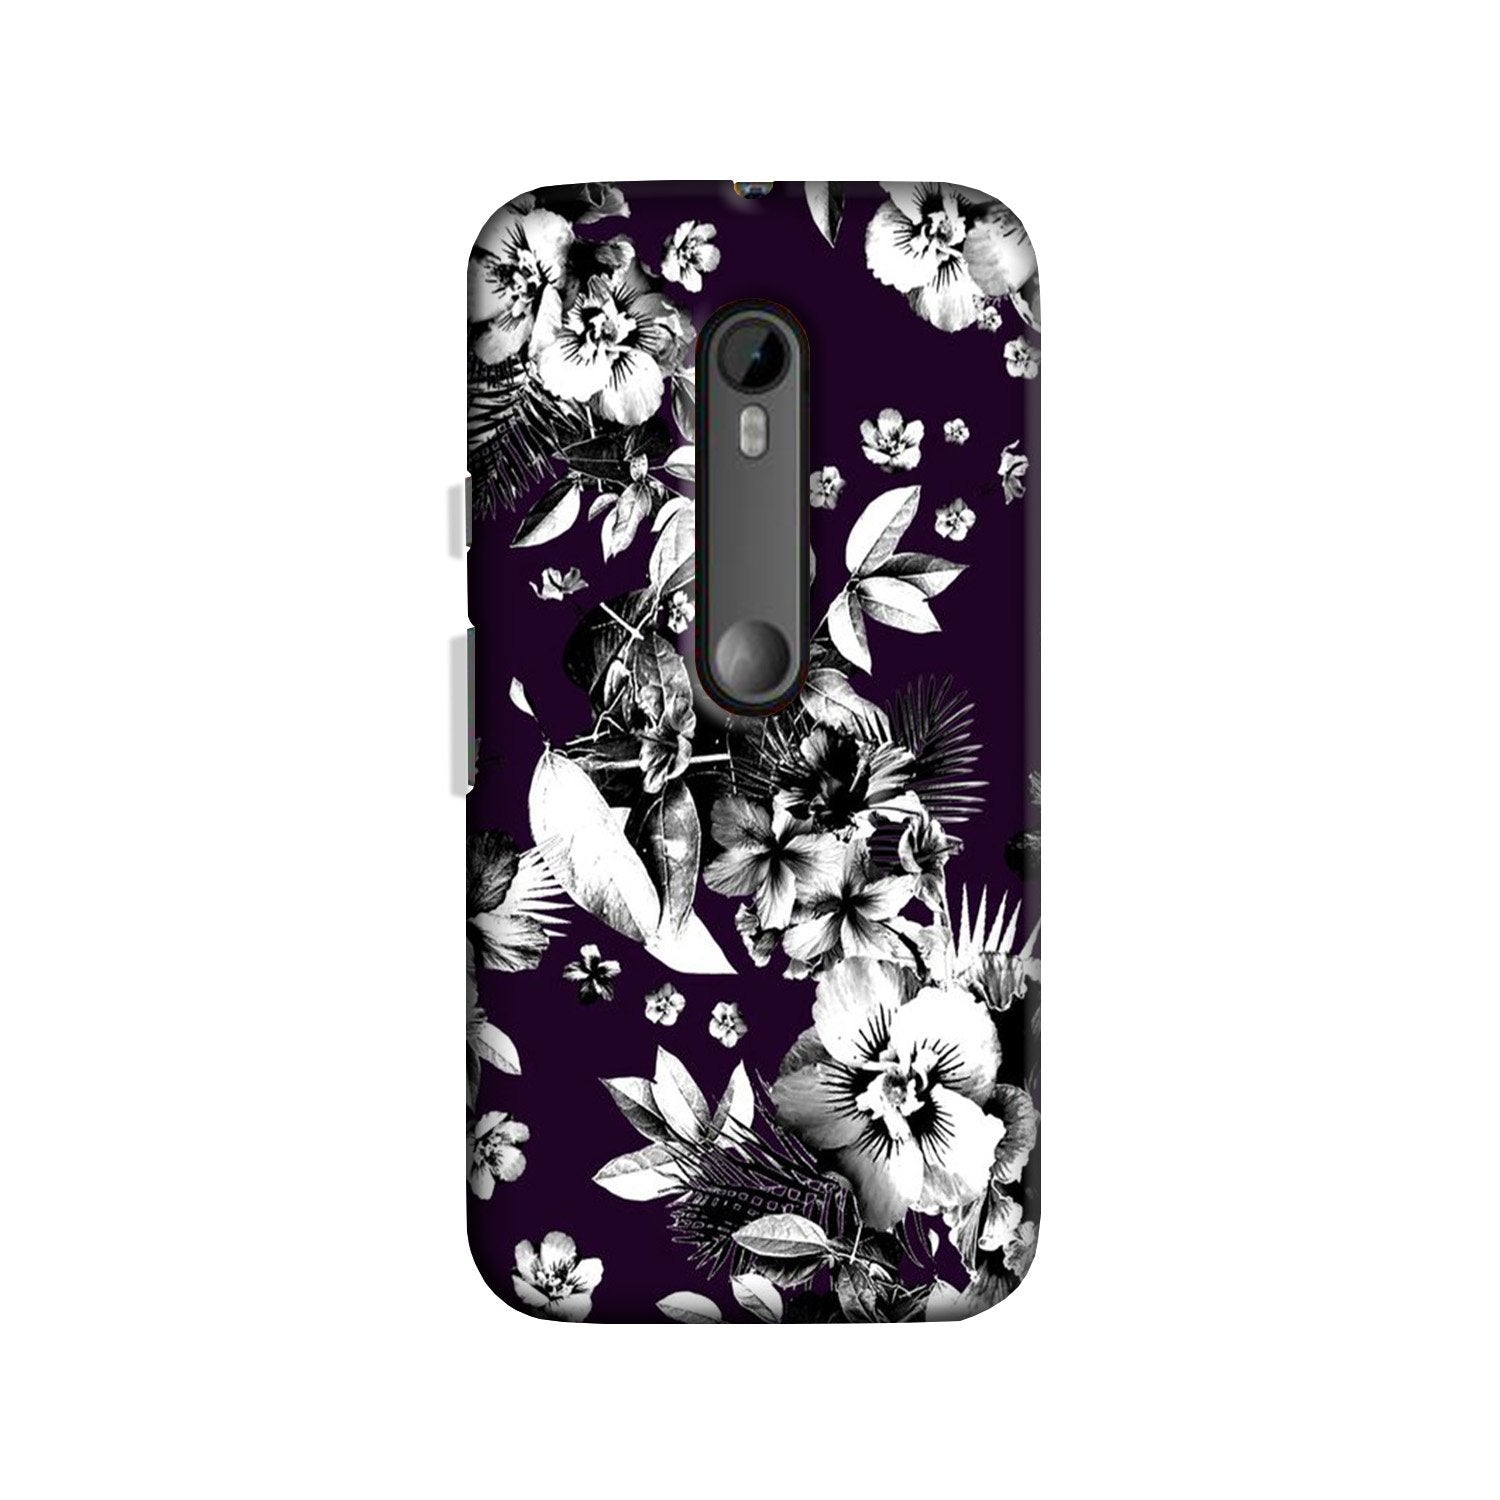 white flowers Case for Moto X Force